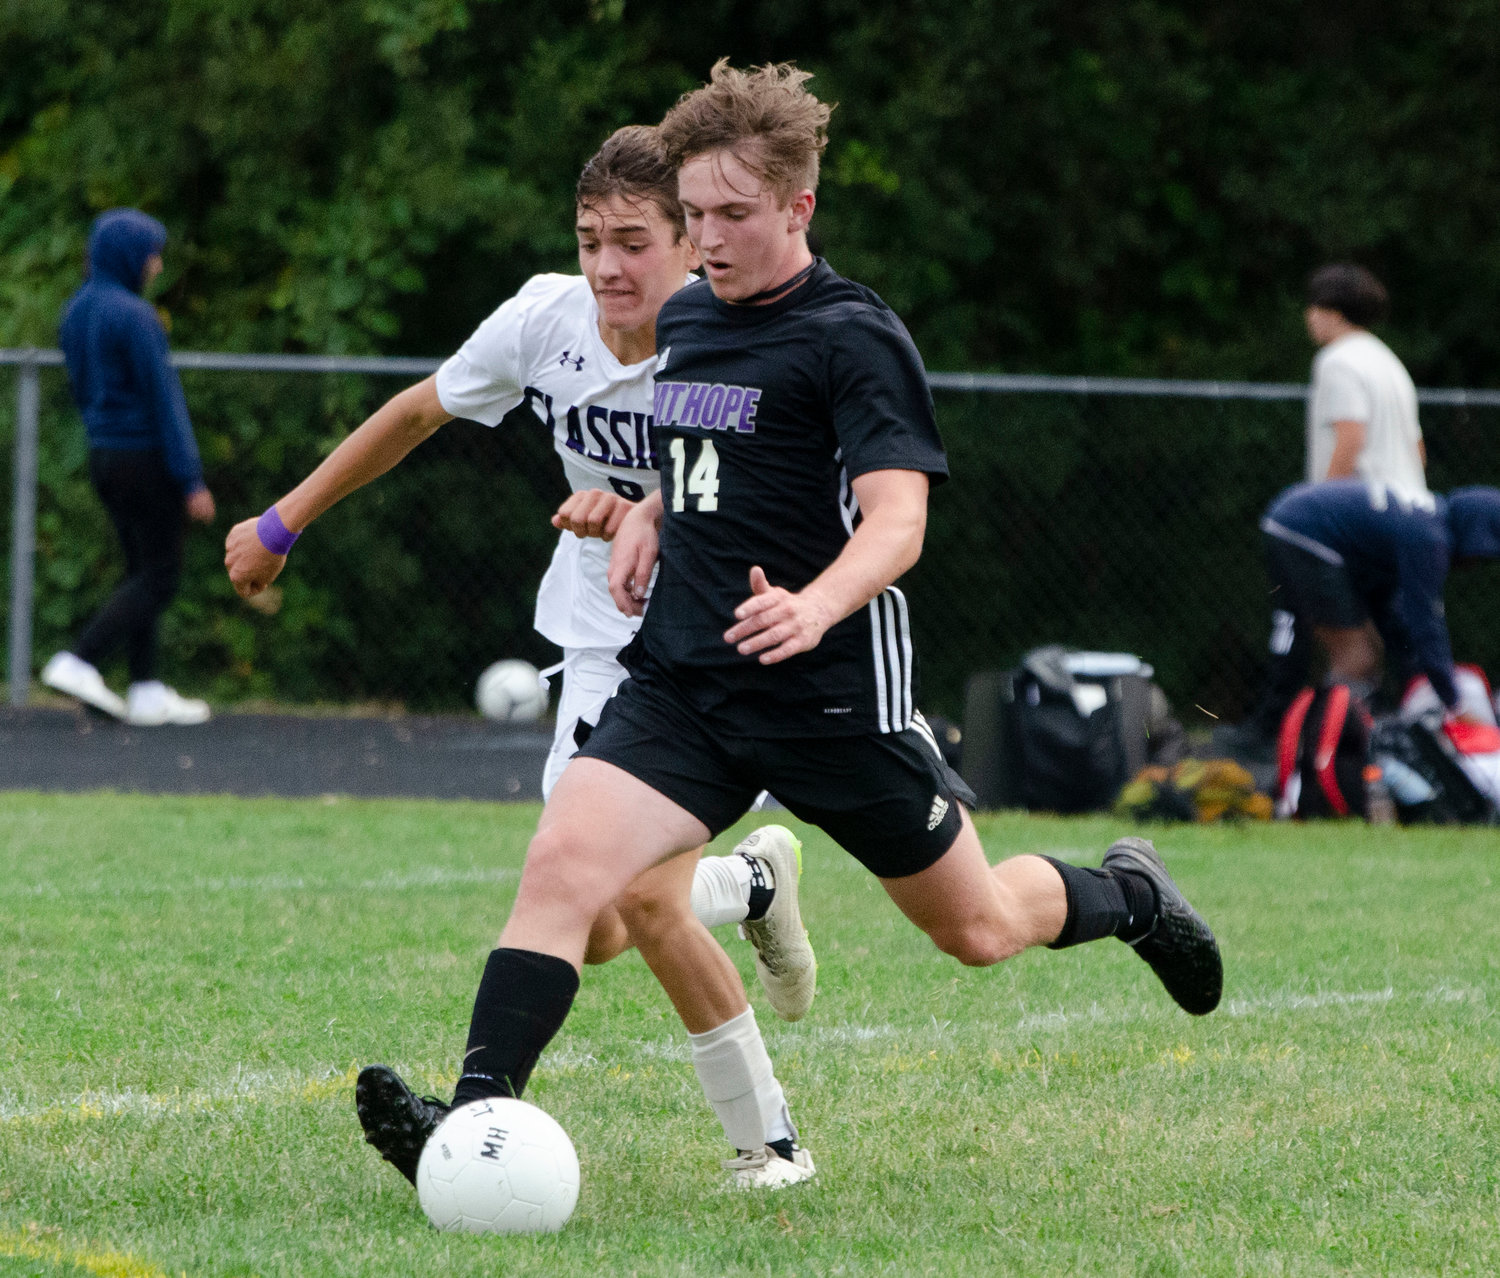 Senior defender Griffin Berardo clears the ball out of the Huskies defensive zone.